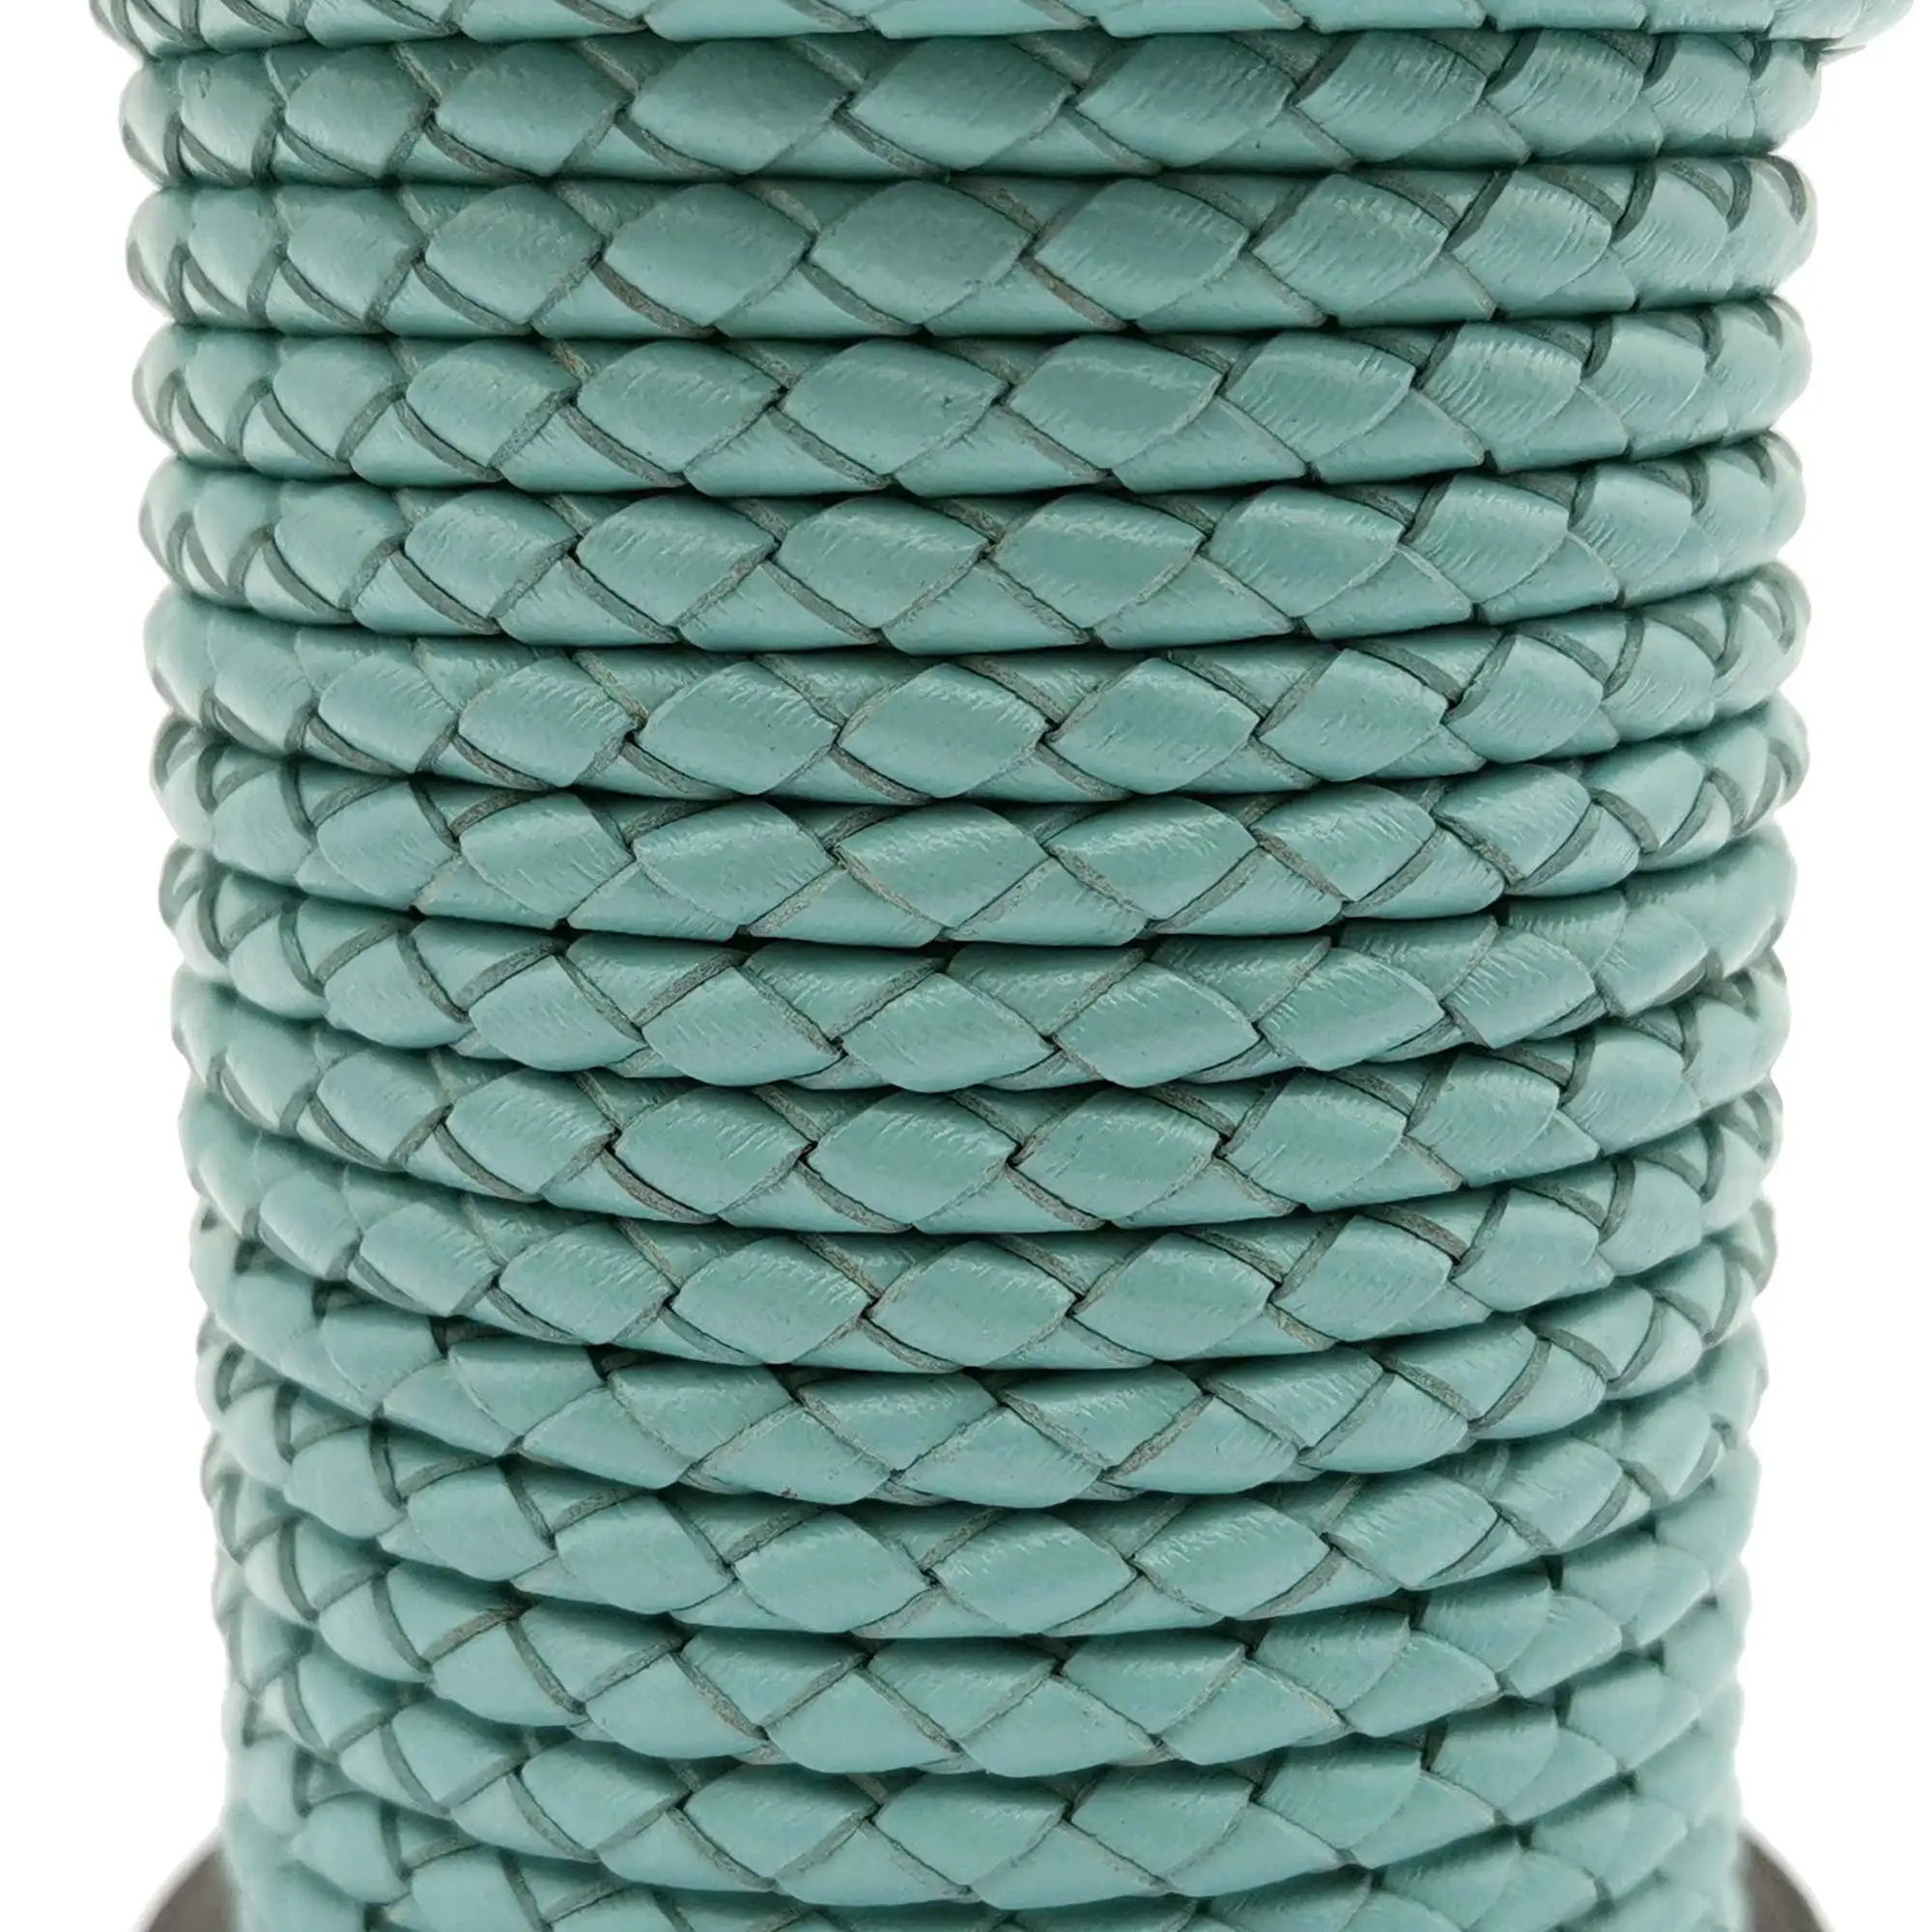 

5 Yards 4mm Baby Blue Braided Leather Cords Woven Folded Genuine Strap Jewelry Making Bolos Tie